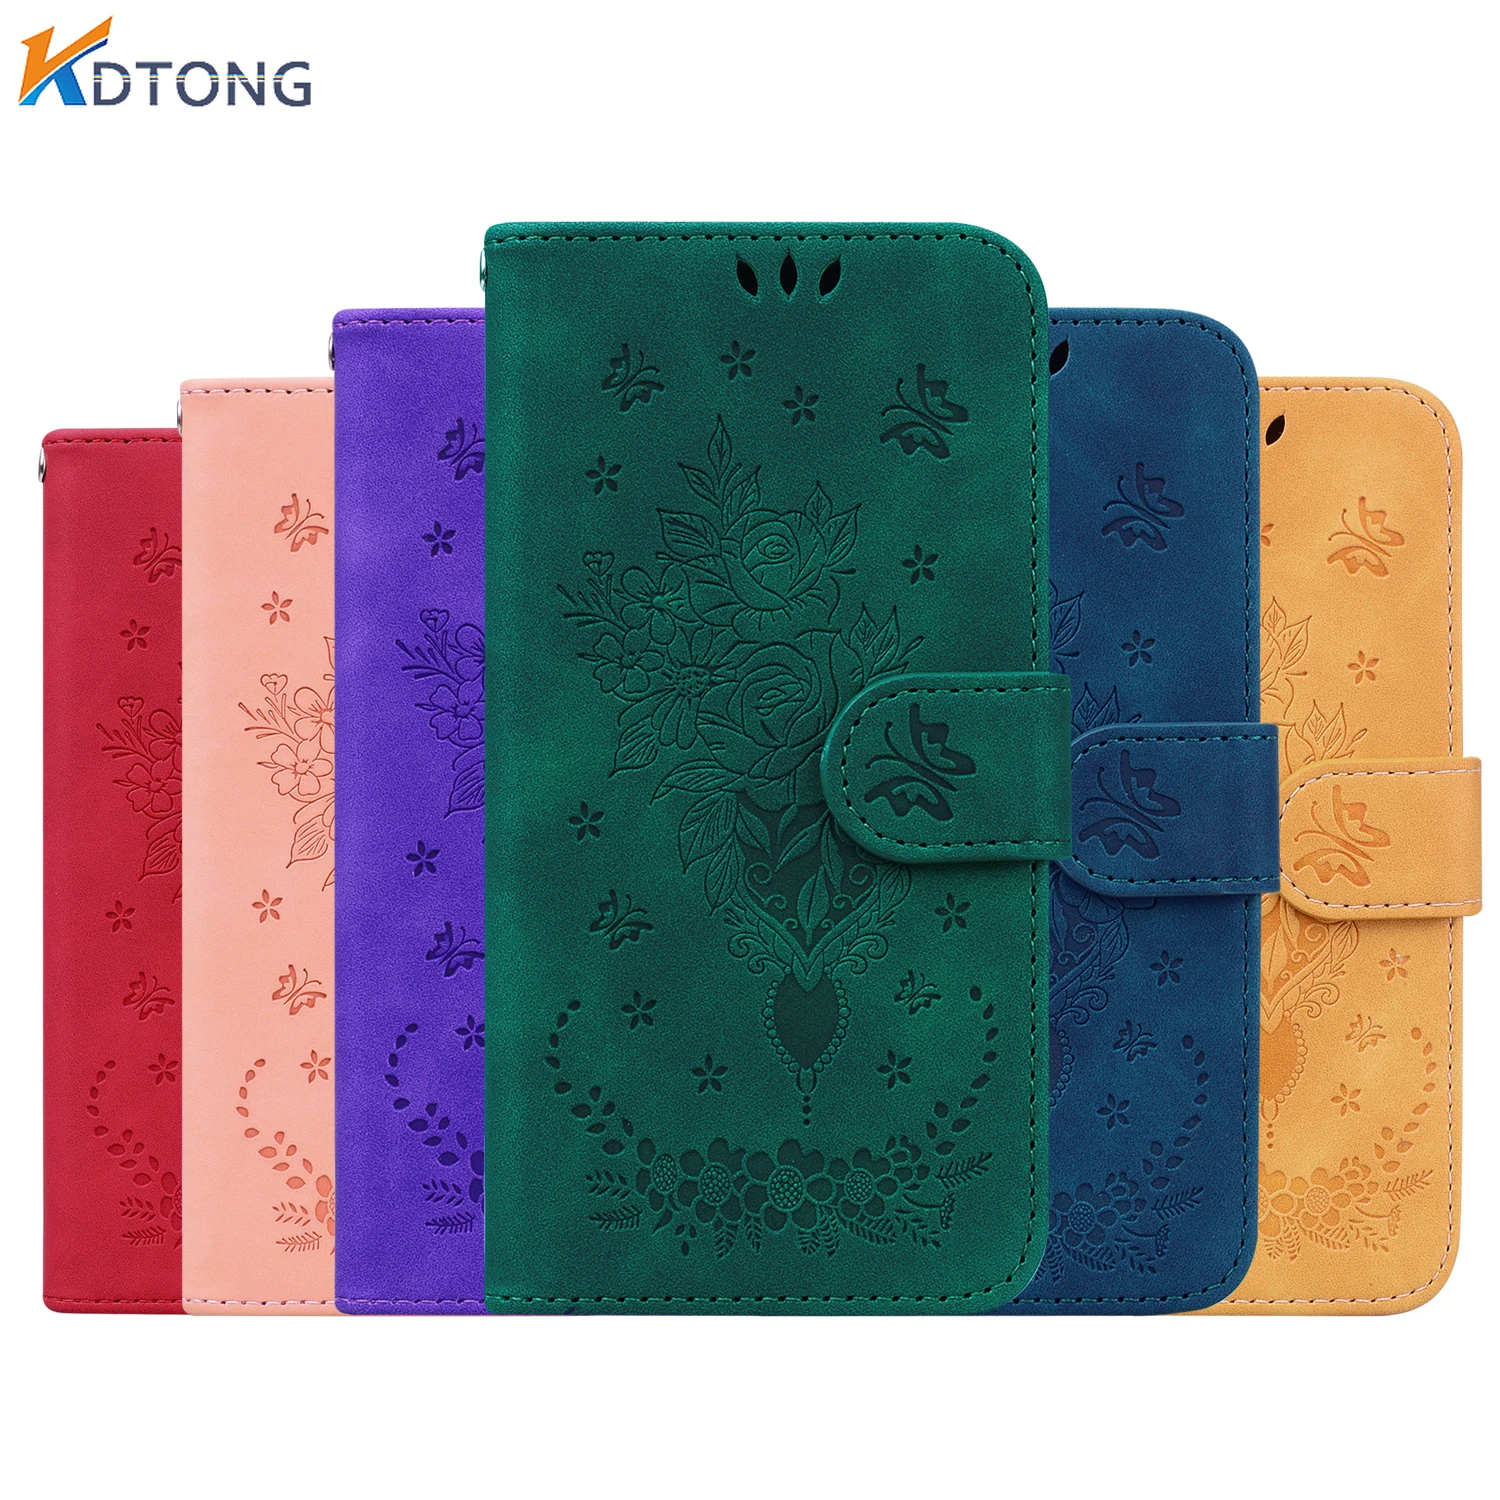 

Embossed Wallet Leather Flip Case For Nokia G300 G20 G10 C20 C10 X20 X10 XR20 5.4 3.4 2.4 1.4 1.3 6.2 7.2 Shockproof Stand Cover